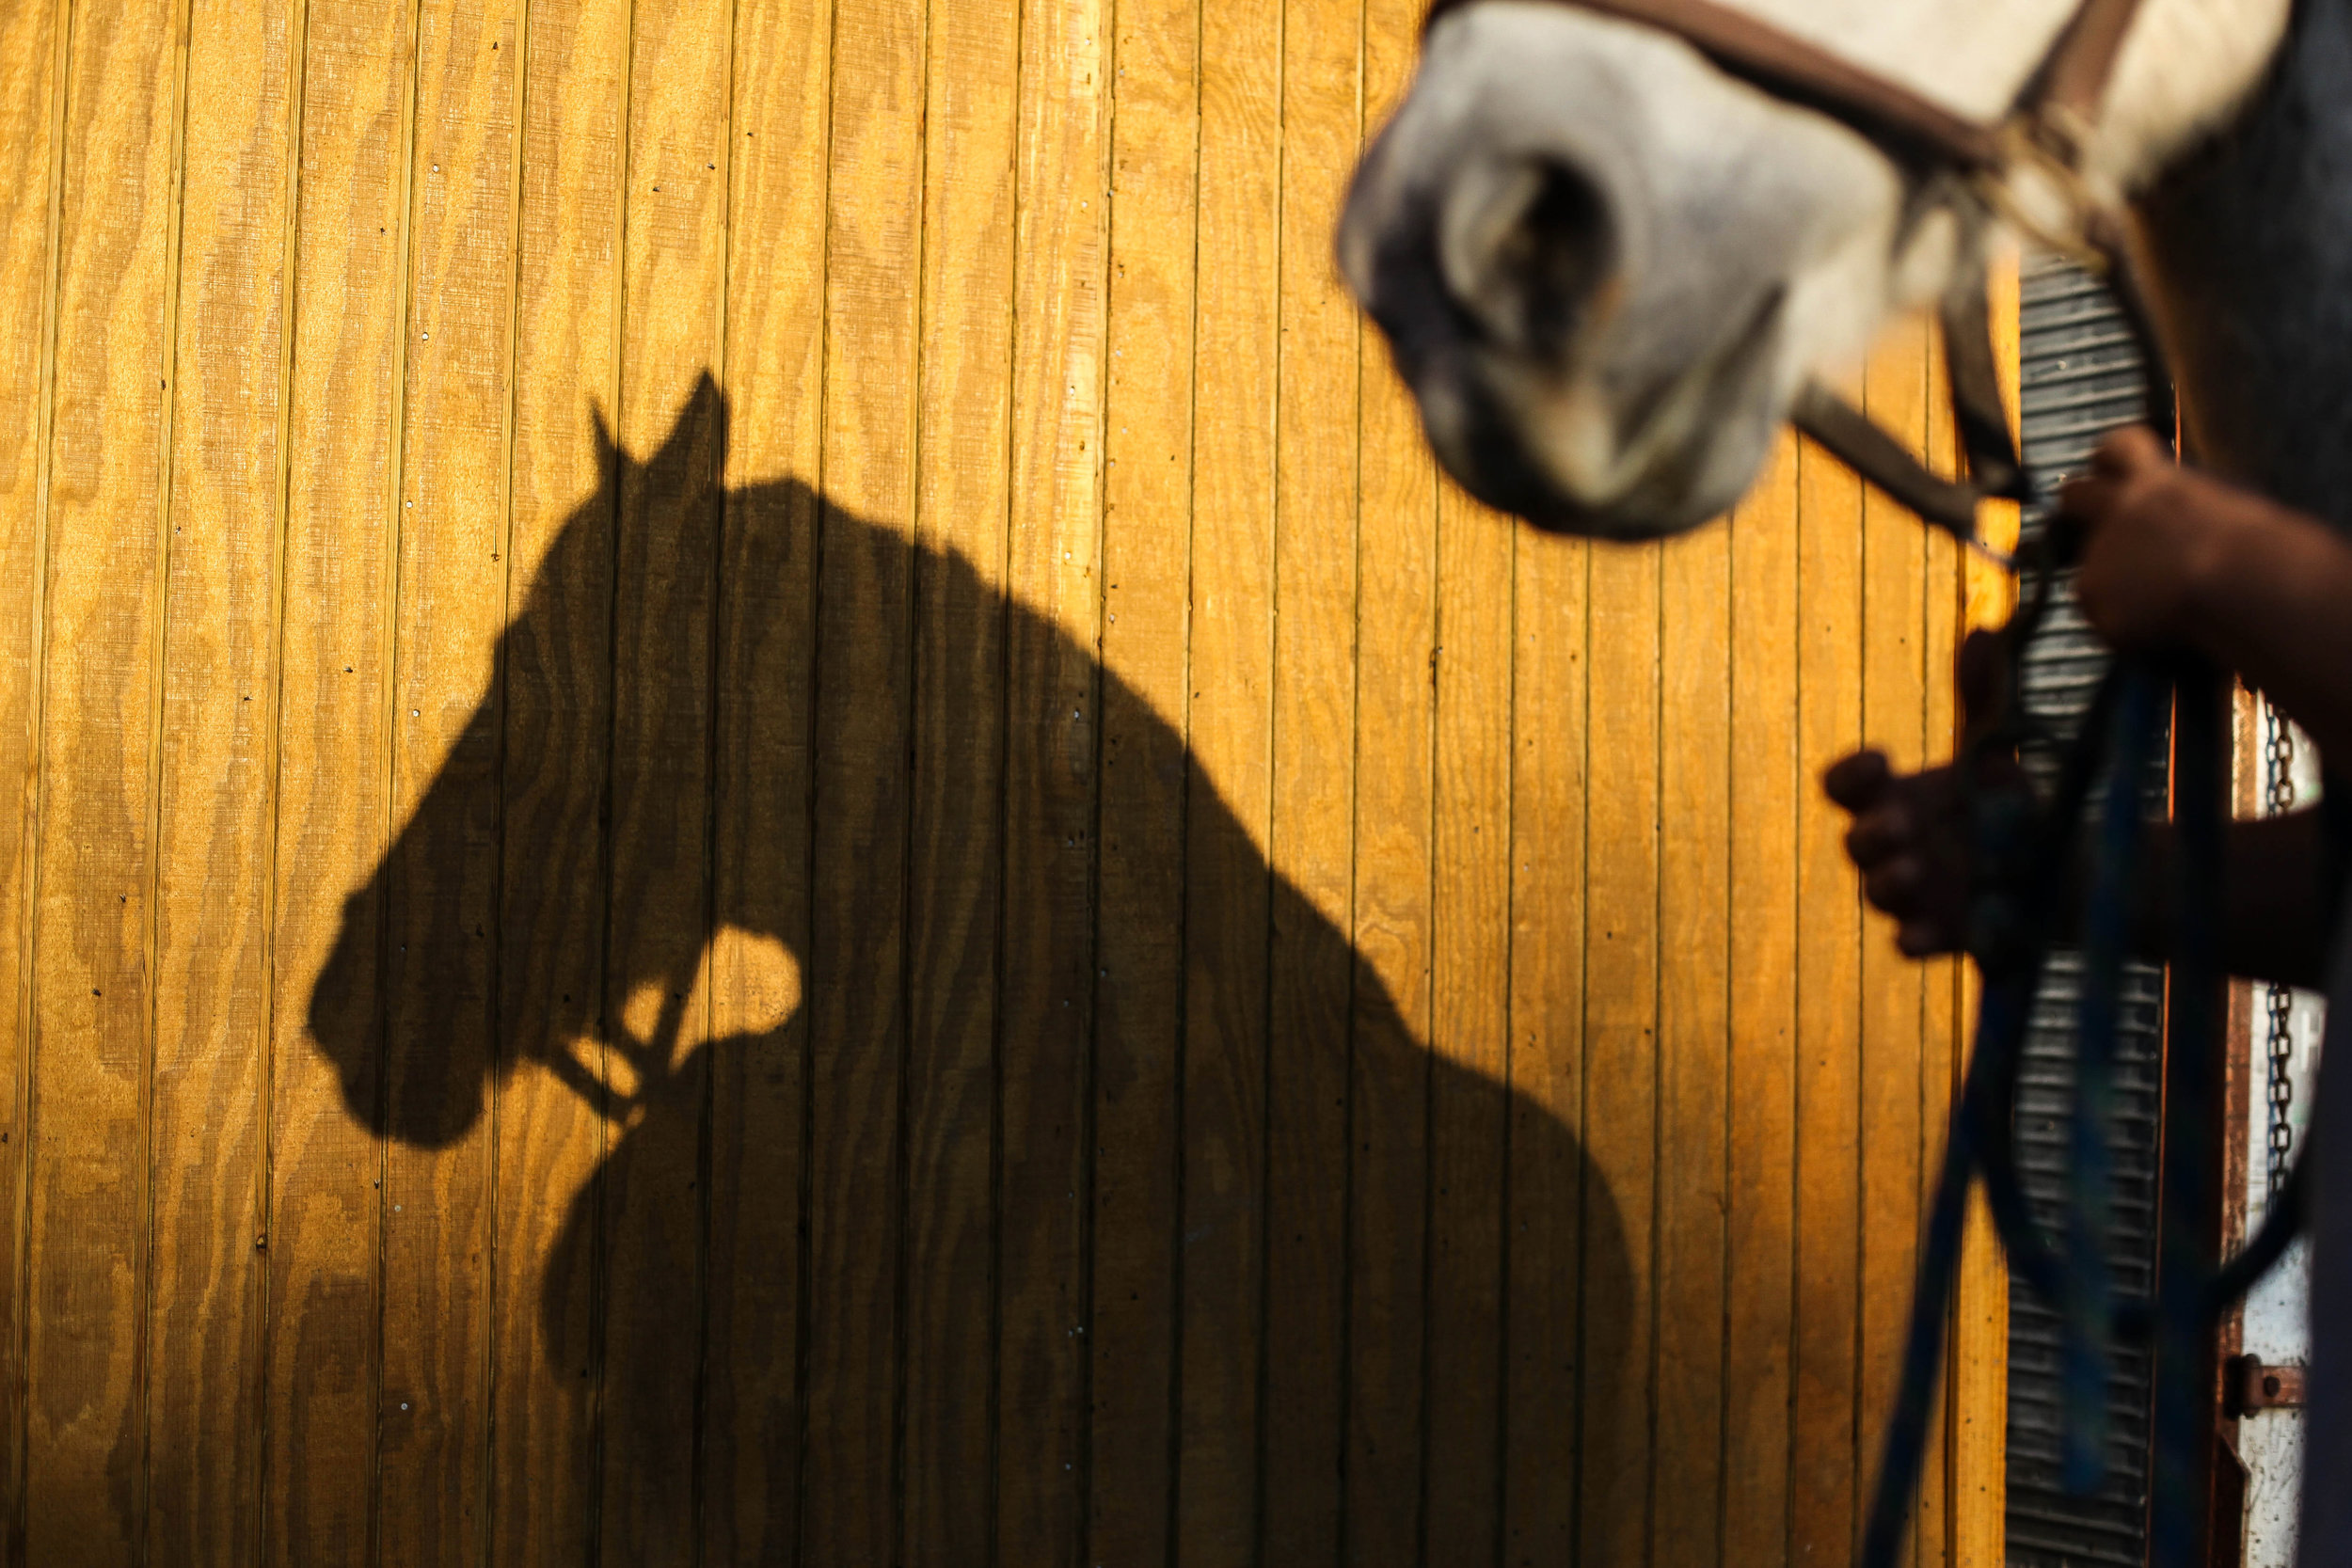  The shadows of Darla Cherry, 54, and her rescued horse Lady are cast against a shed at Meadow Haven Horse Rescue, in Smiley, Texas on Monday, Oct. 29, 2018. 